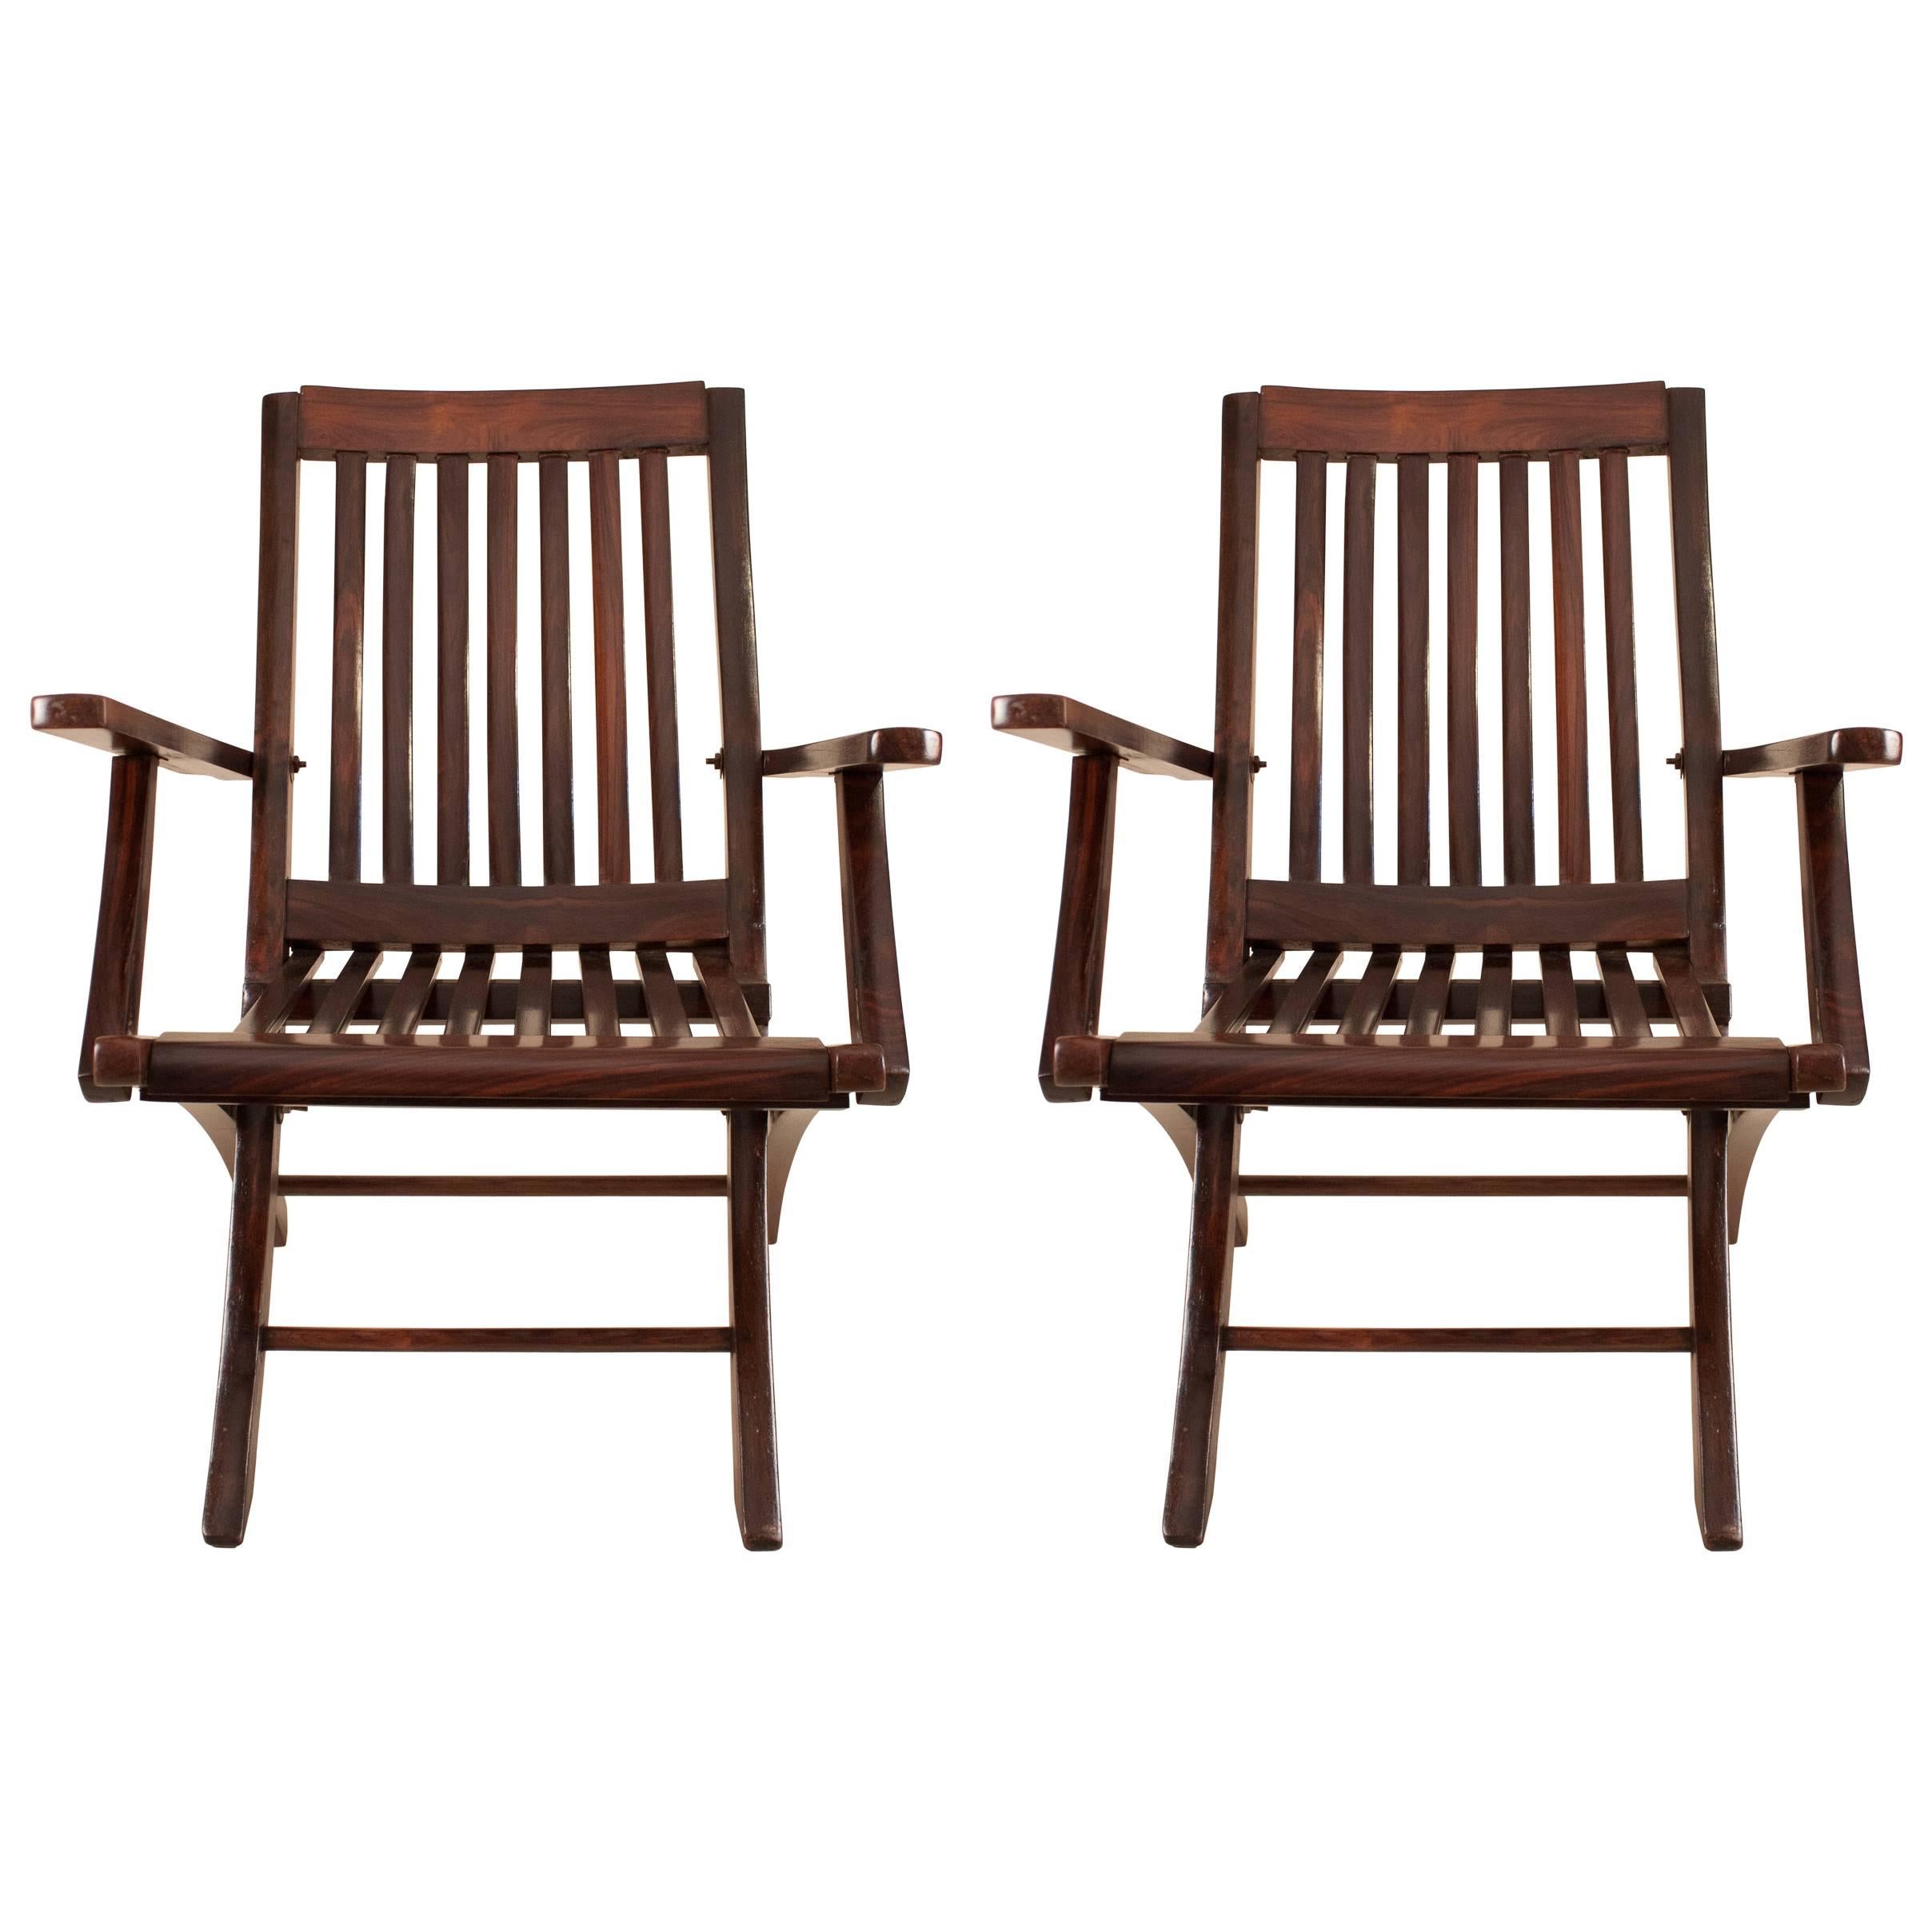 Pair of Rosewood Folding Steamer Deck Chairs